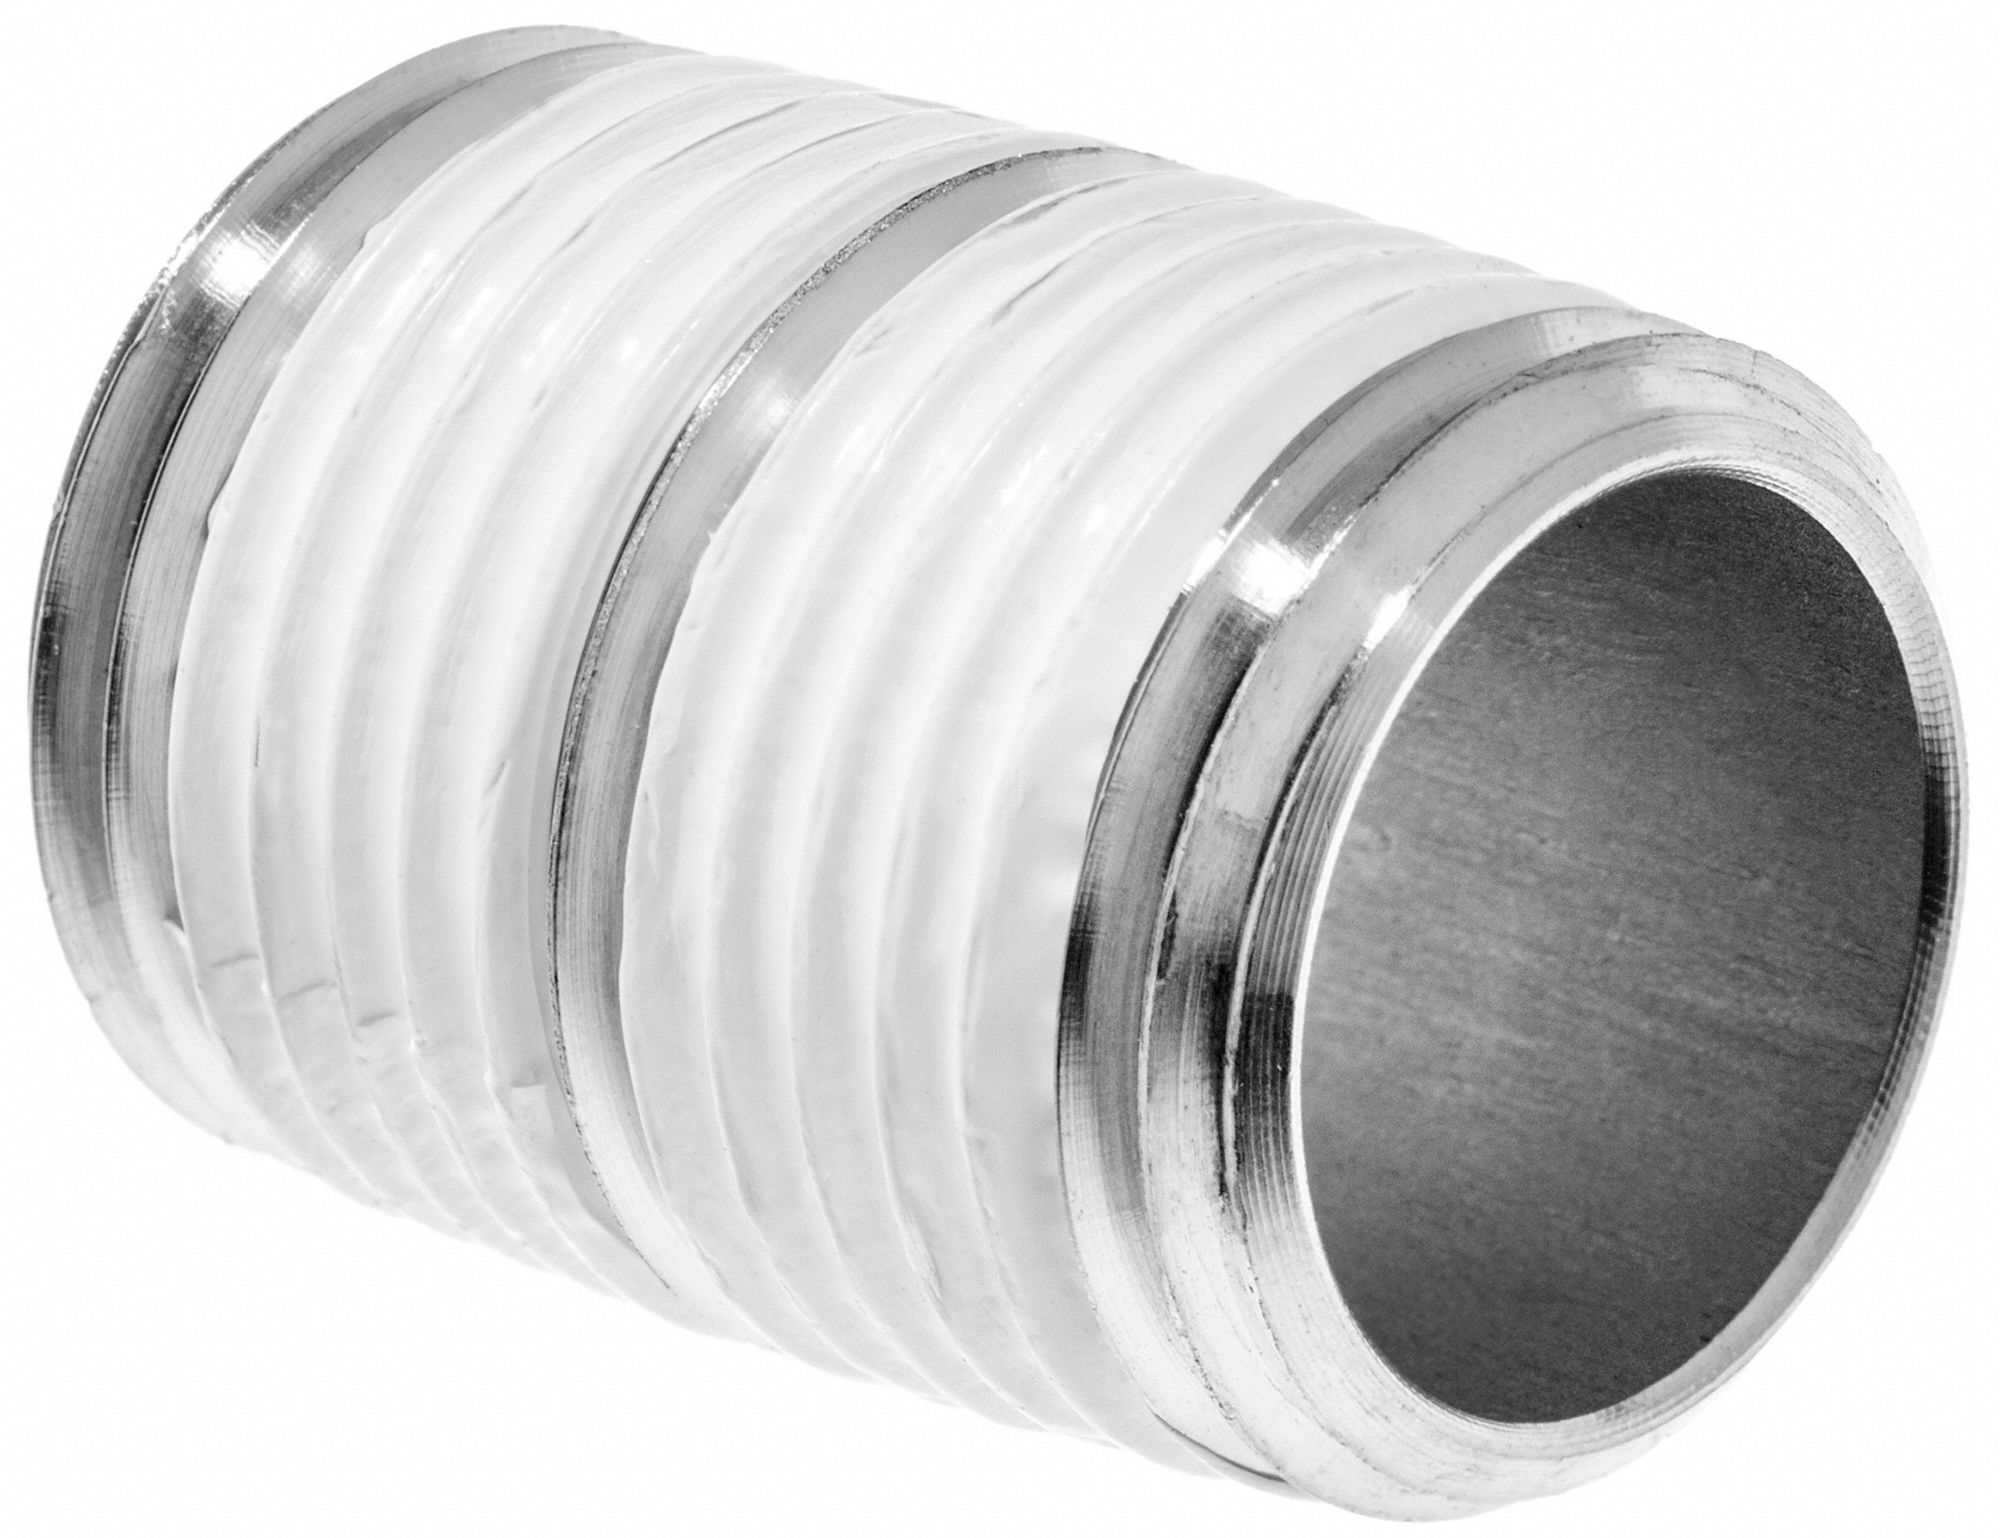 Stainless Steel 316 5ft long Pipe Tube Pipe Seamless Threaded NPT S 40 1 5/8" ID 